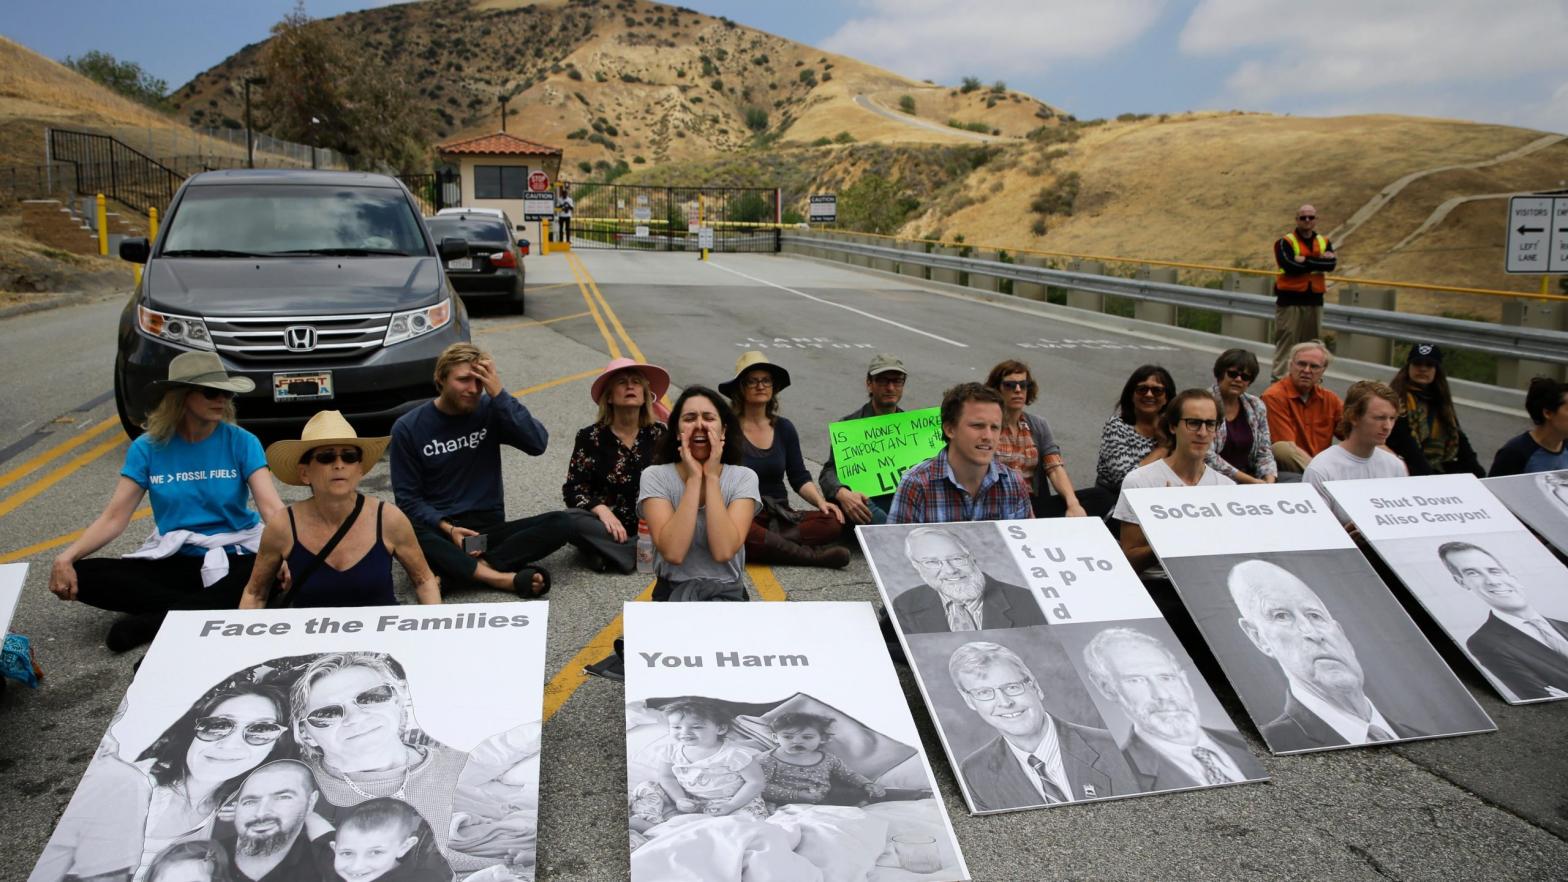 People chant slogans during a protest outside the Aliso Canyon storage facility, in the Porter Ranch section of Los Angeles, May 2016.  (Photo: Jae C. Hong, AP)